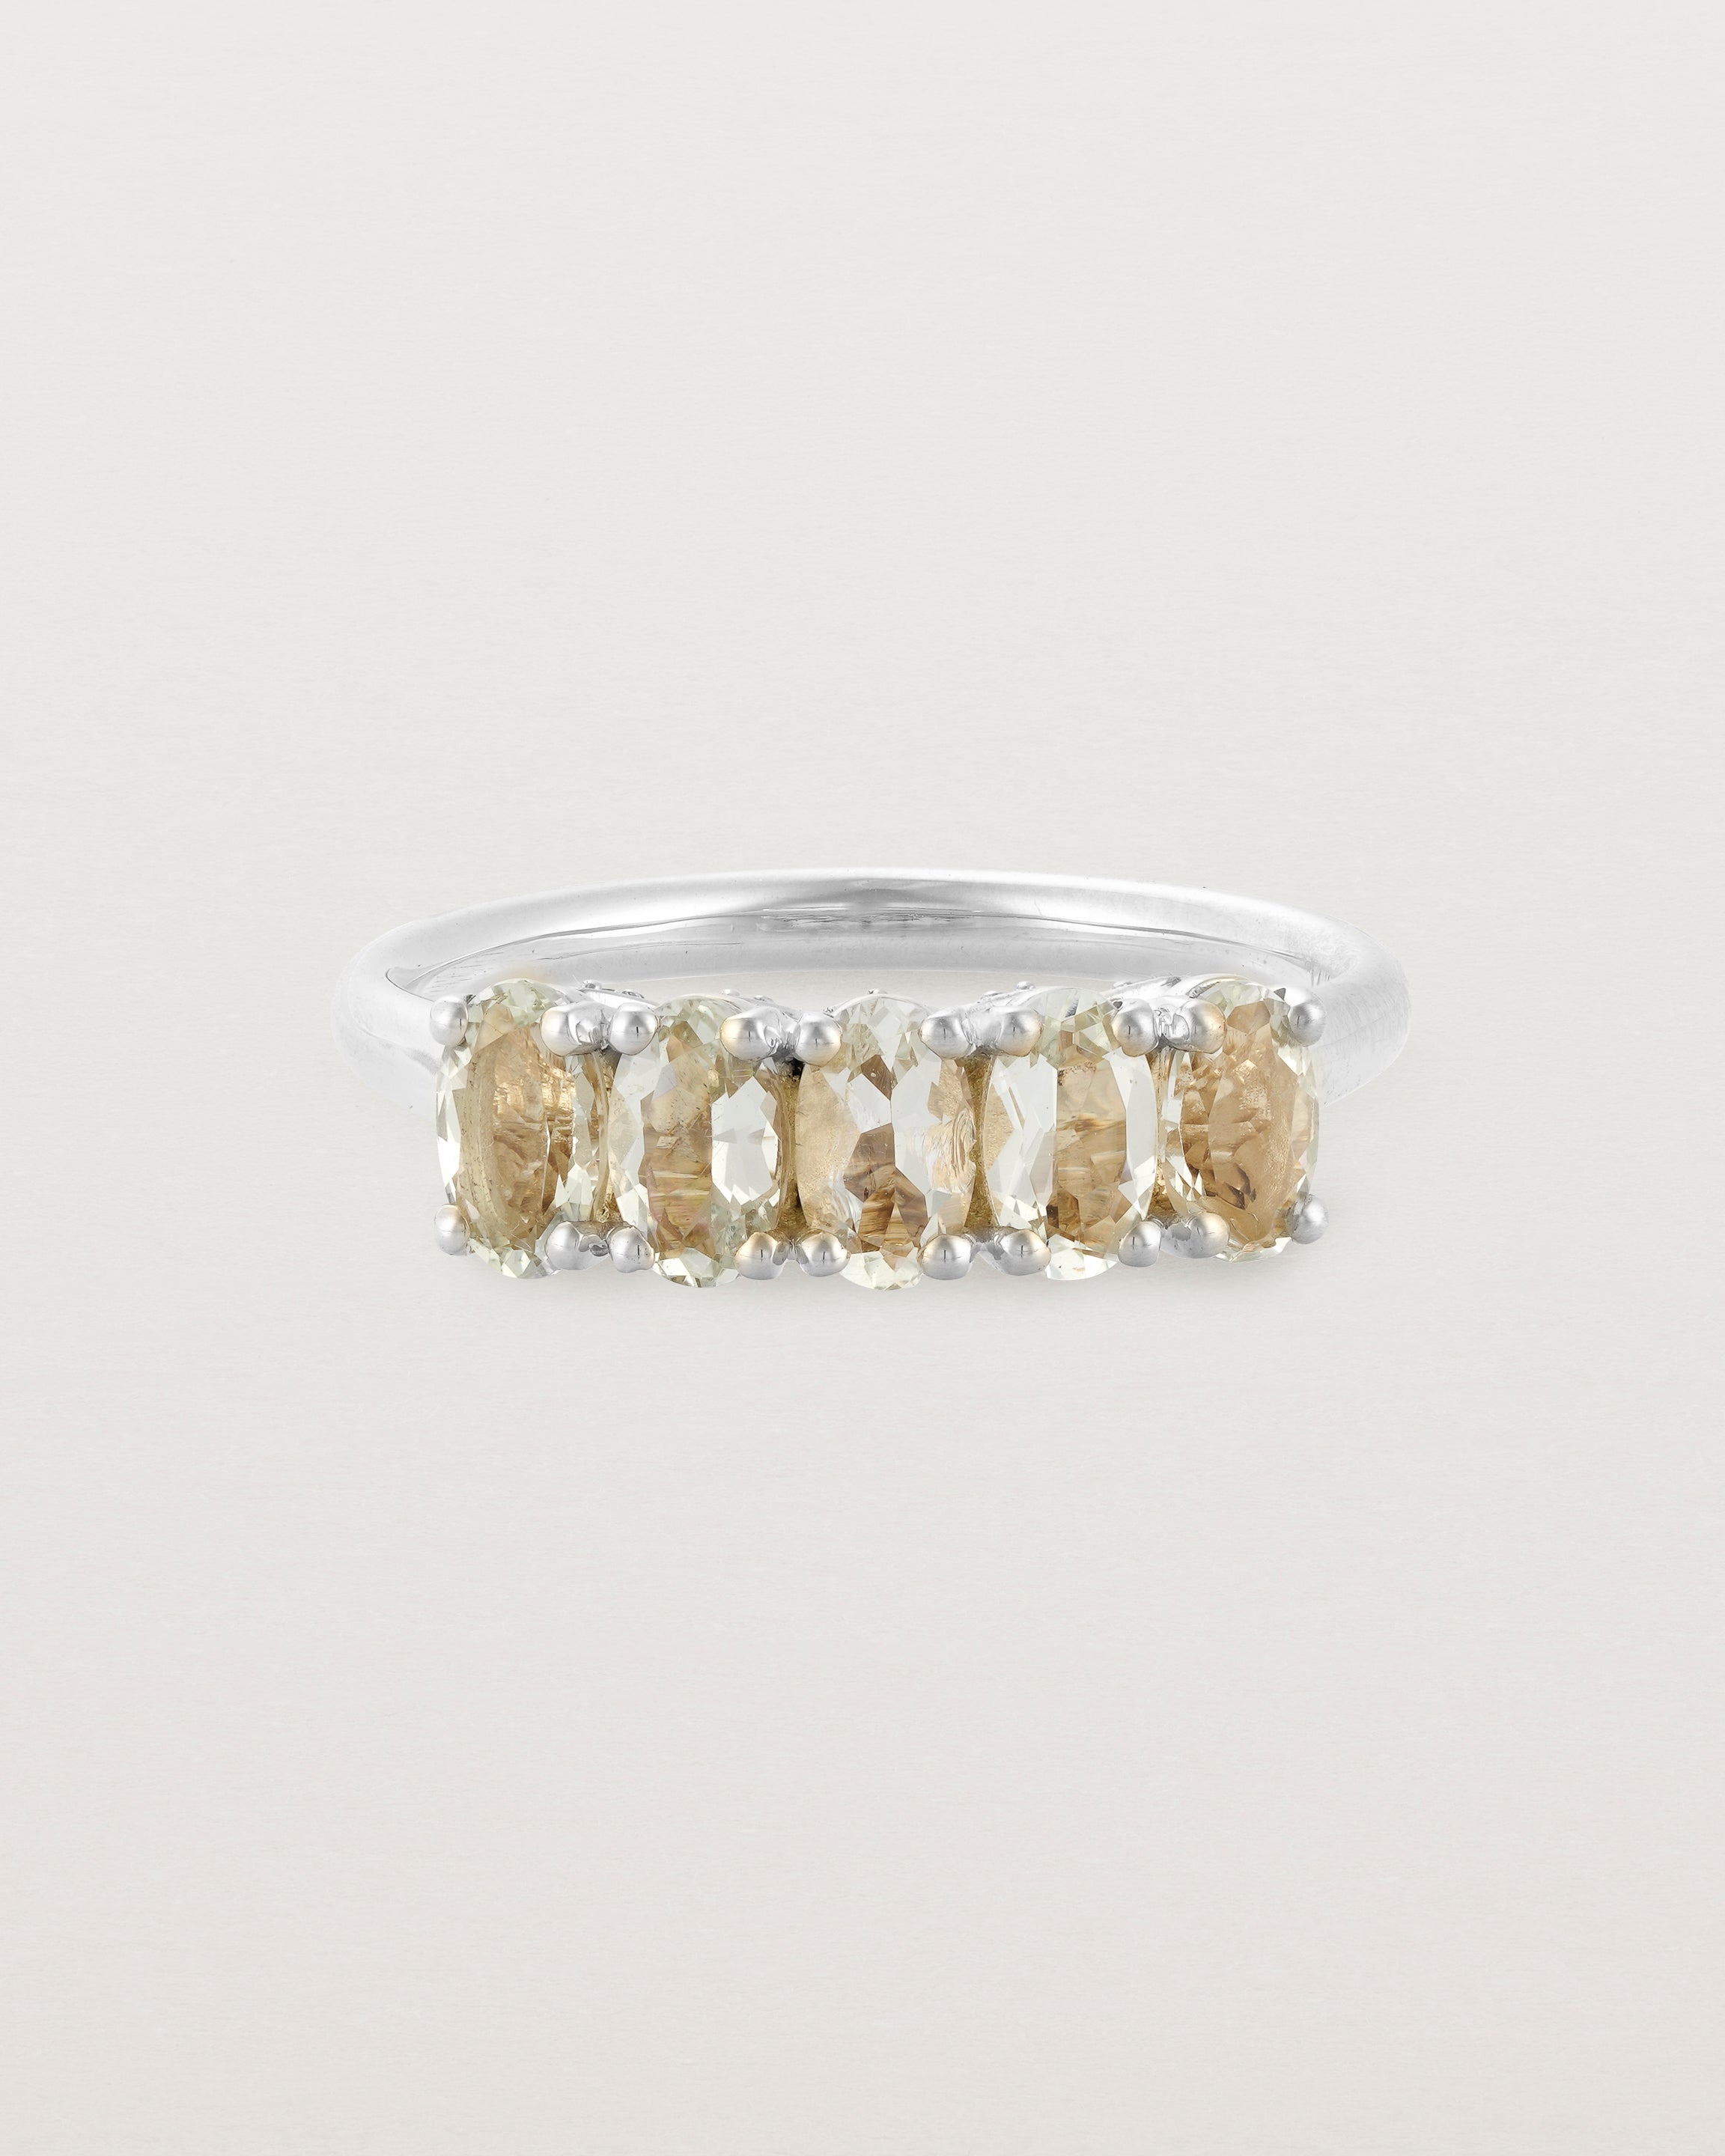 Front view of the Fiore Wrap Ring | Green Amethyst | White Gold.